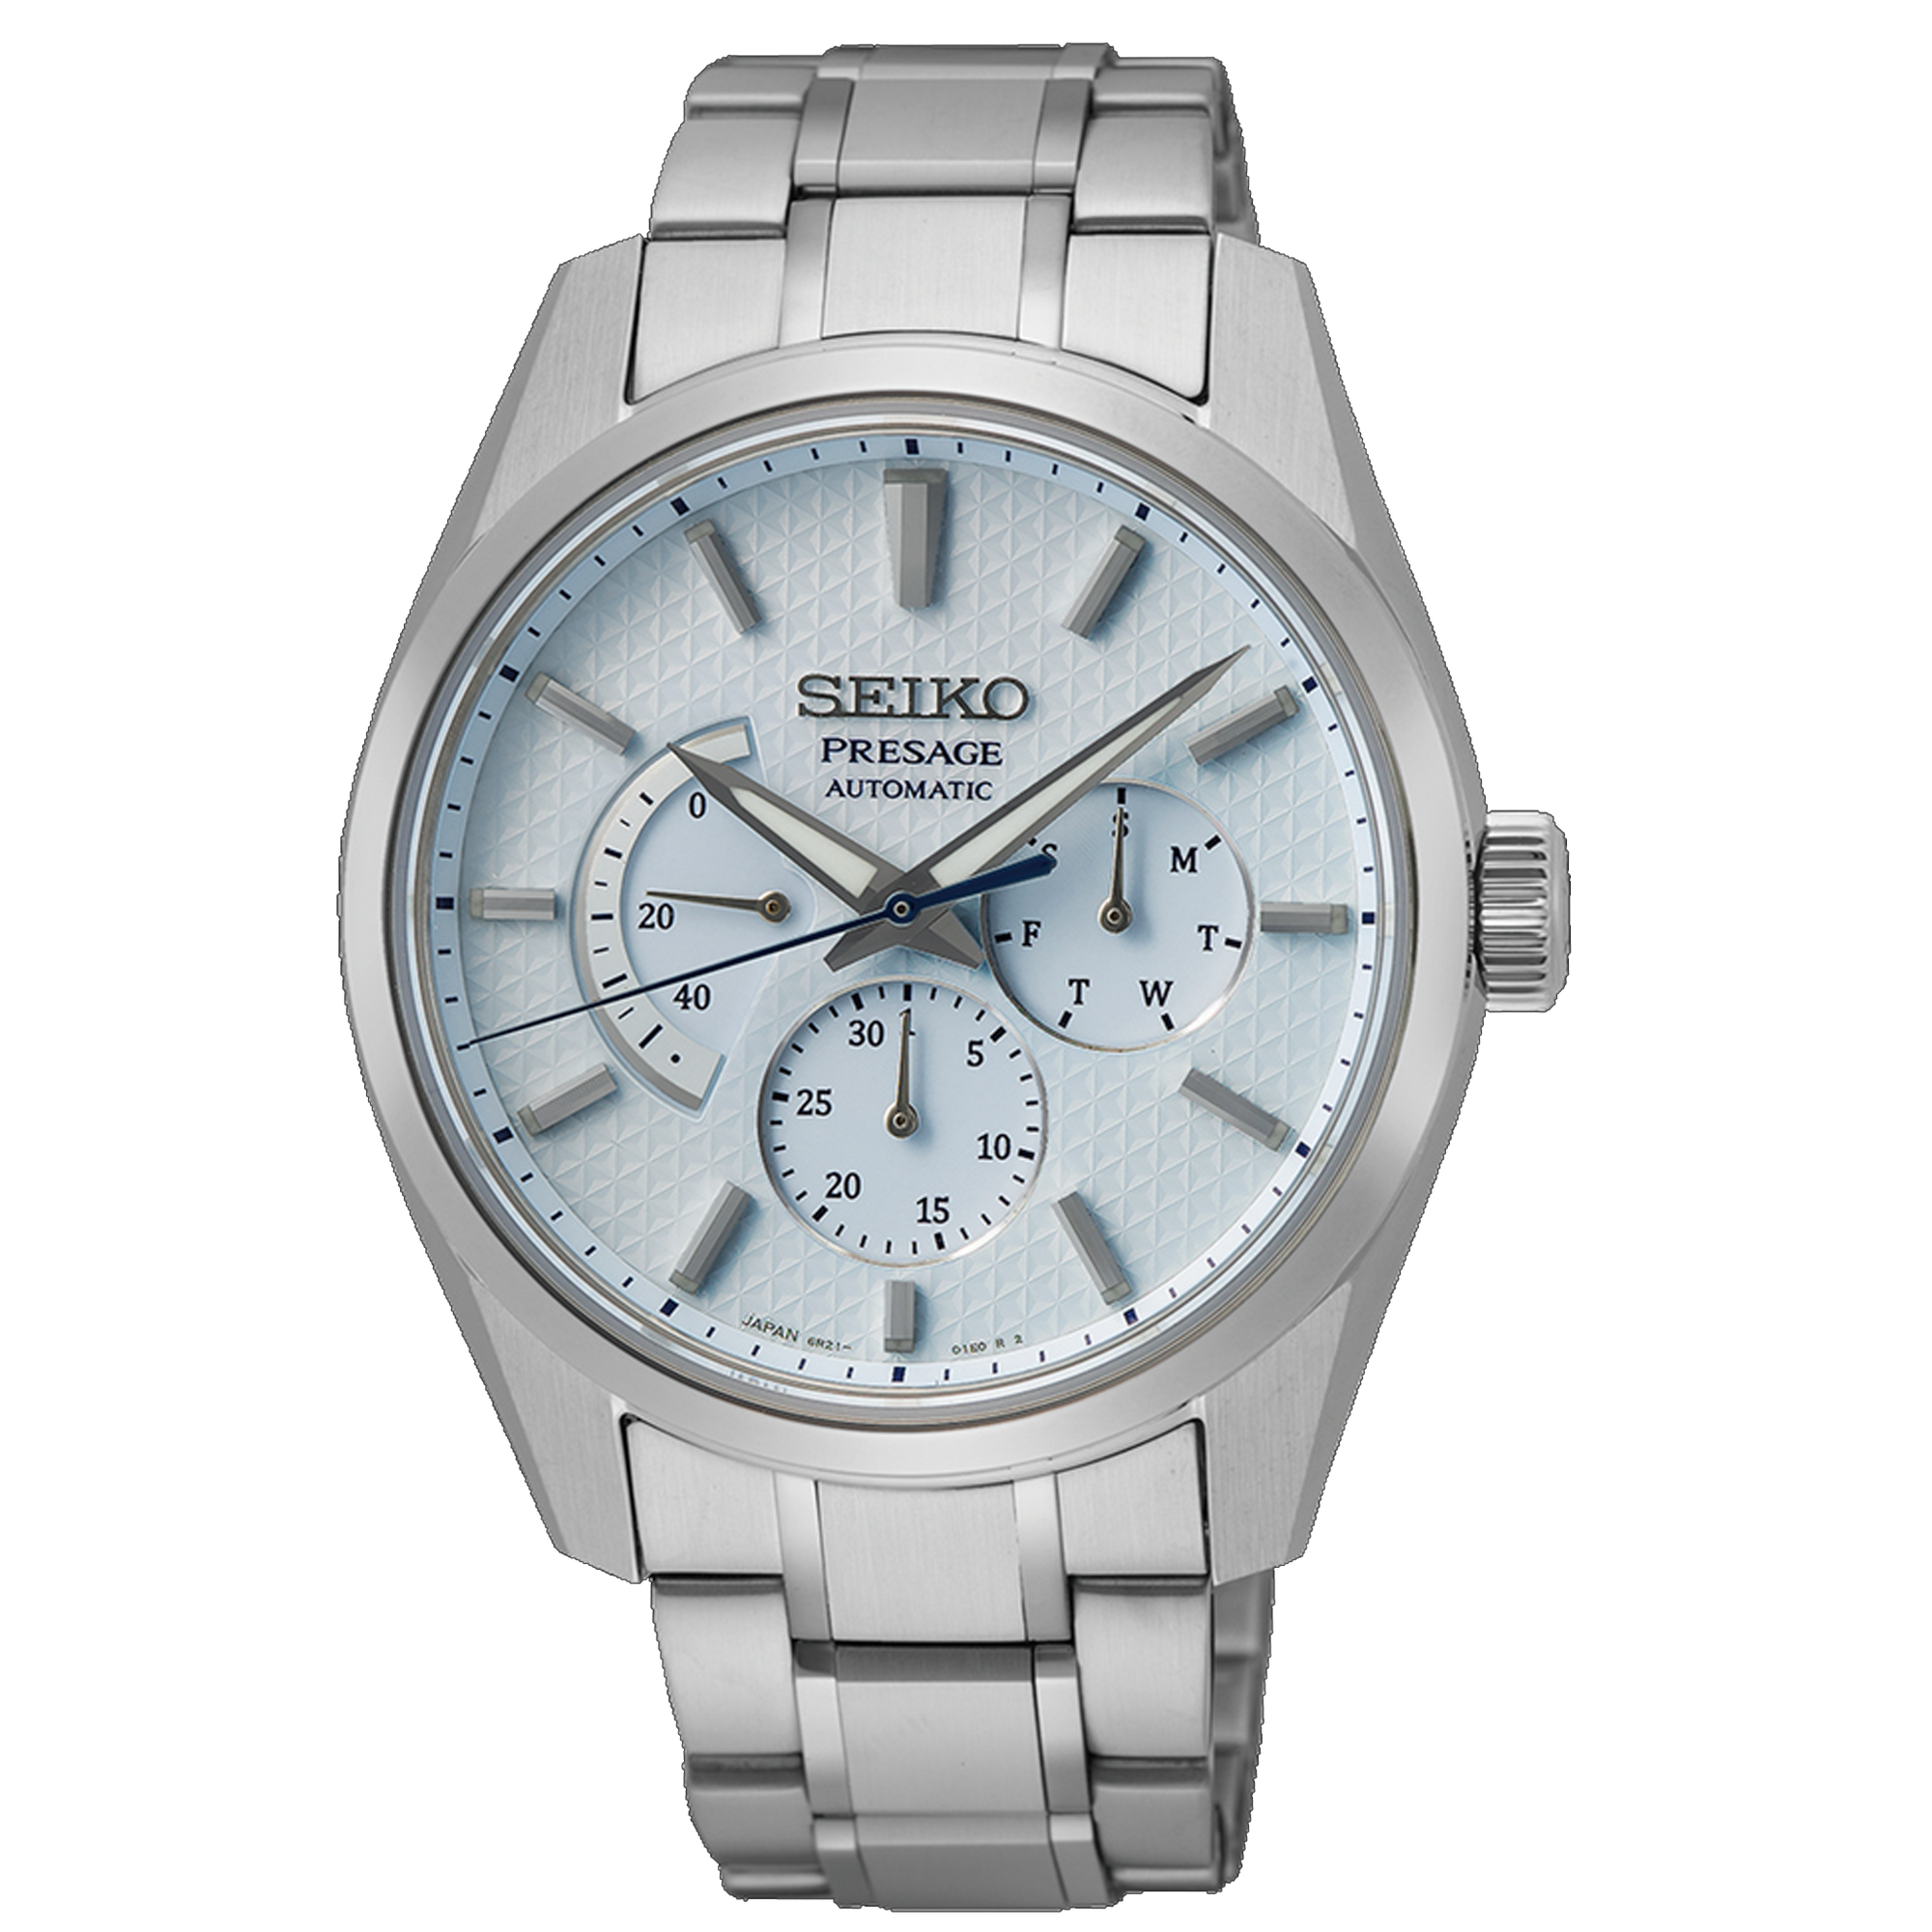 Seiko - At The Halifax Watch Company - sapphire-crystal - sapphire-crystal